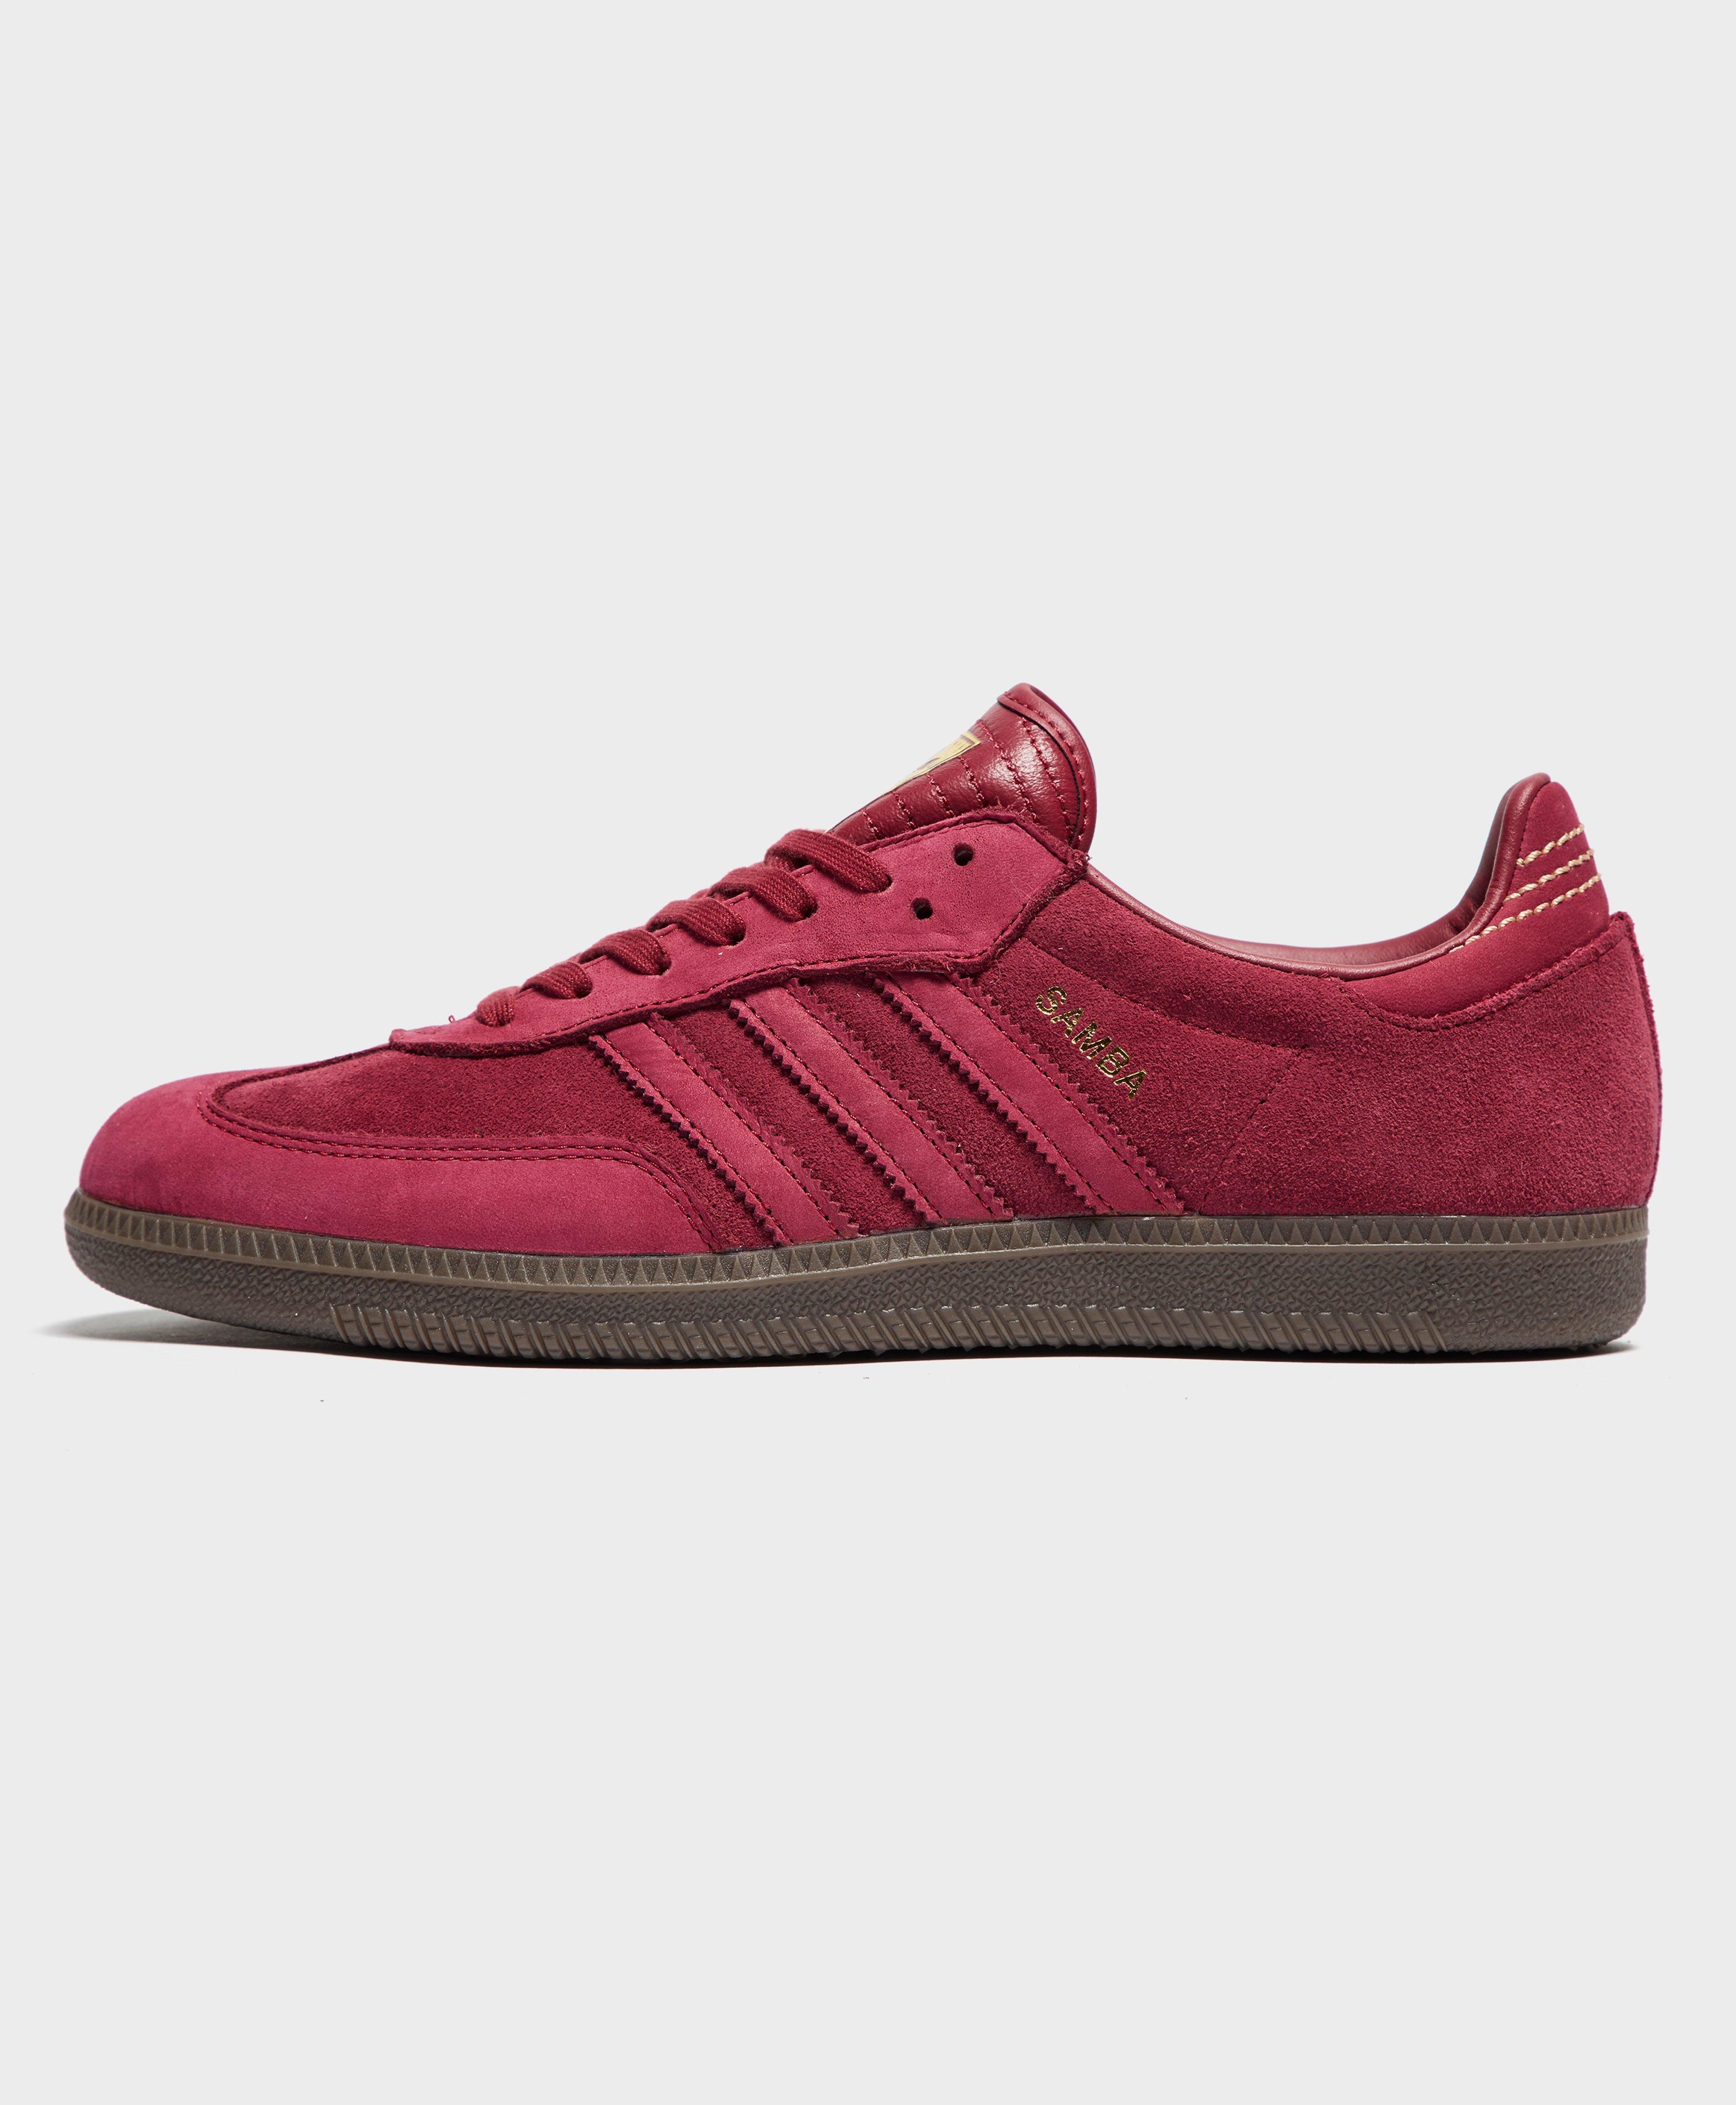 adidas Originals Suede Samba Fb Mystery Ruby/mystery Ruby/gold Metallic Red for Men -